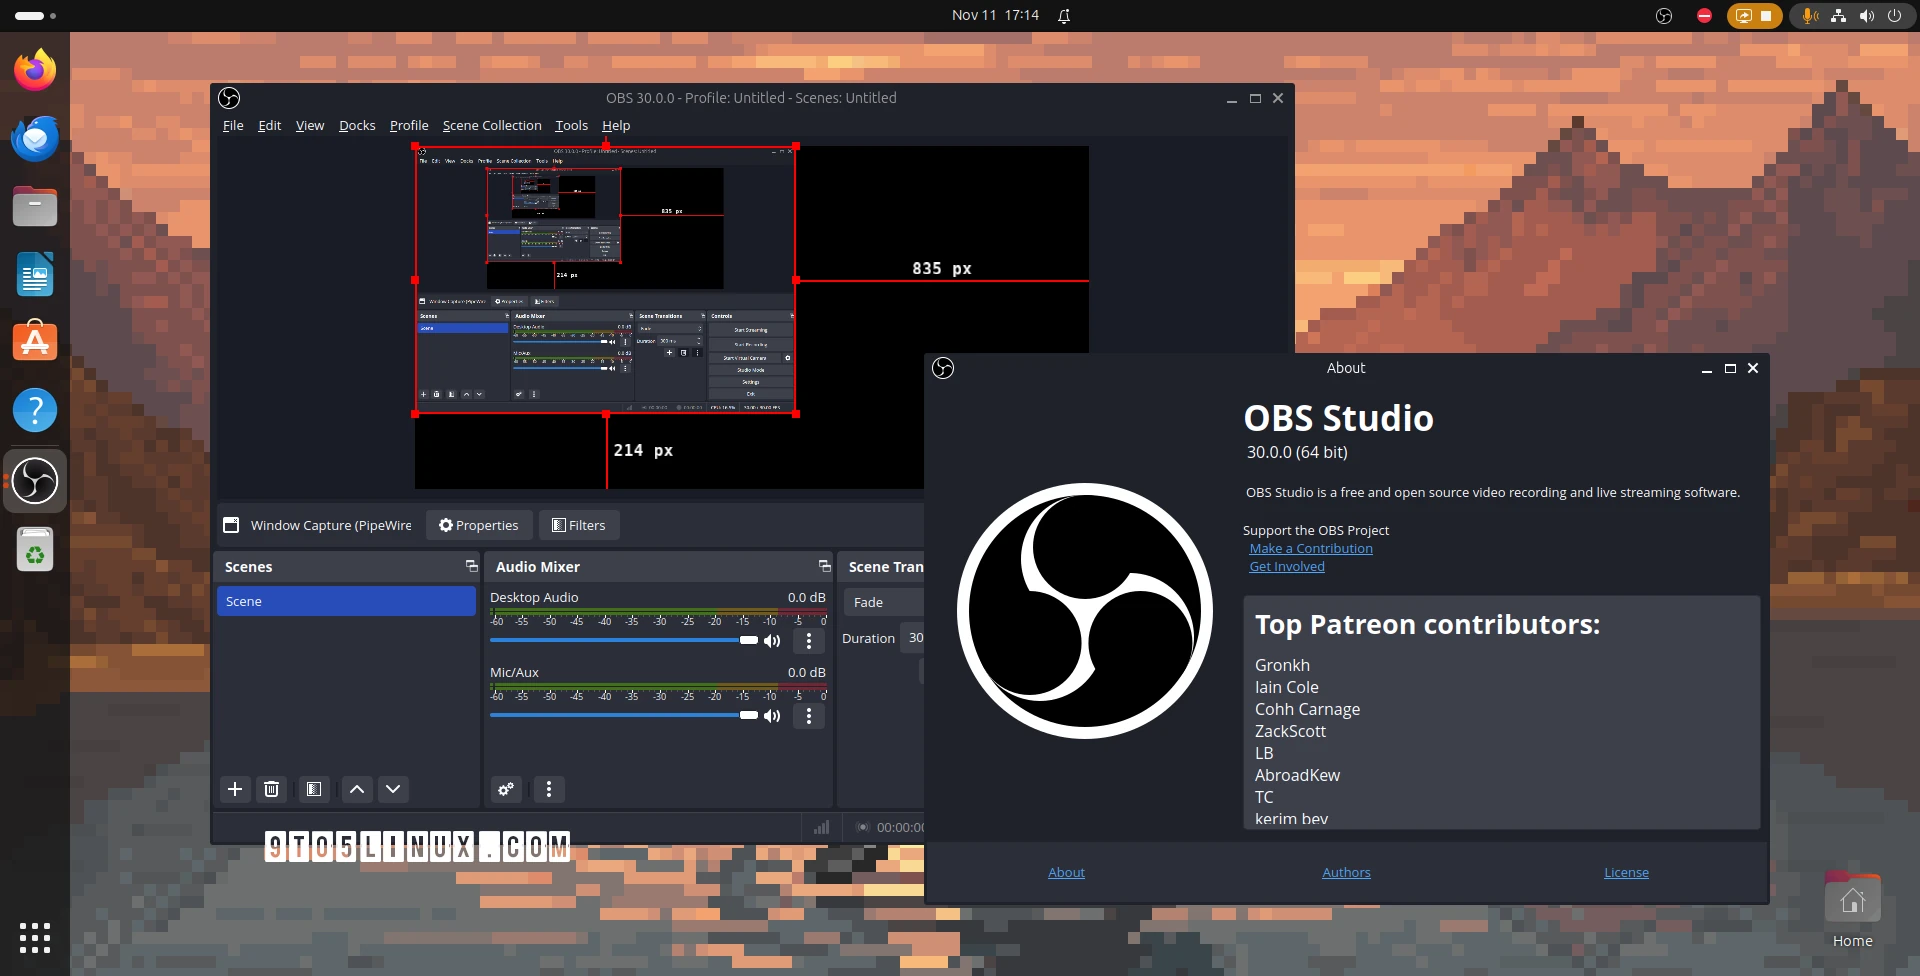 OBS Studio 30 Released with Support for Intel QSV H264, HEVC, and AV1 on Linux